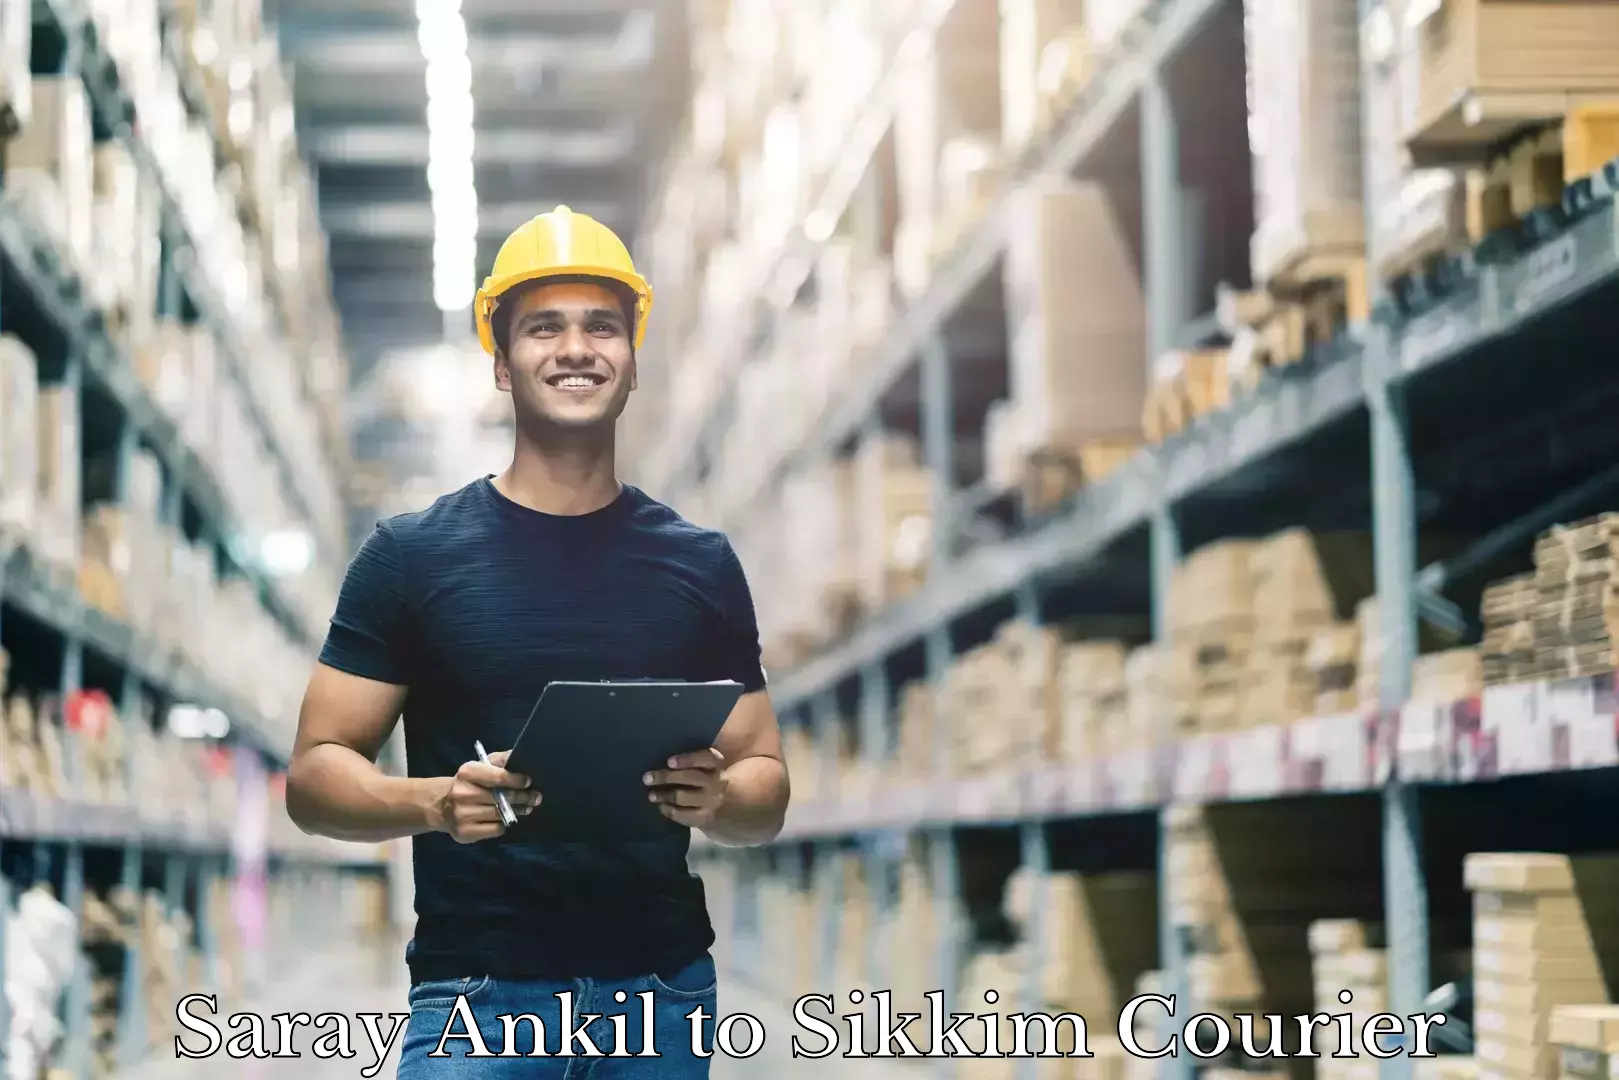 Furniture delivery service Saray Ankil to East Sikkim